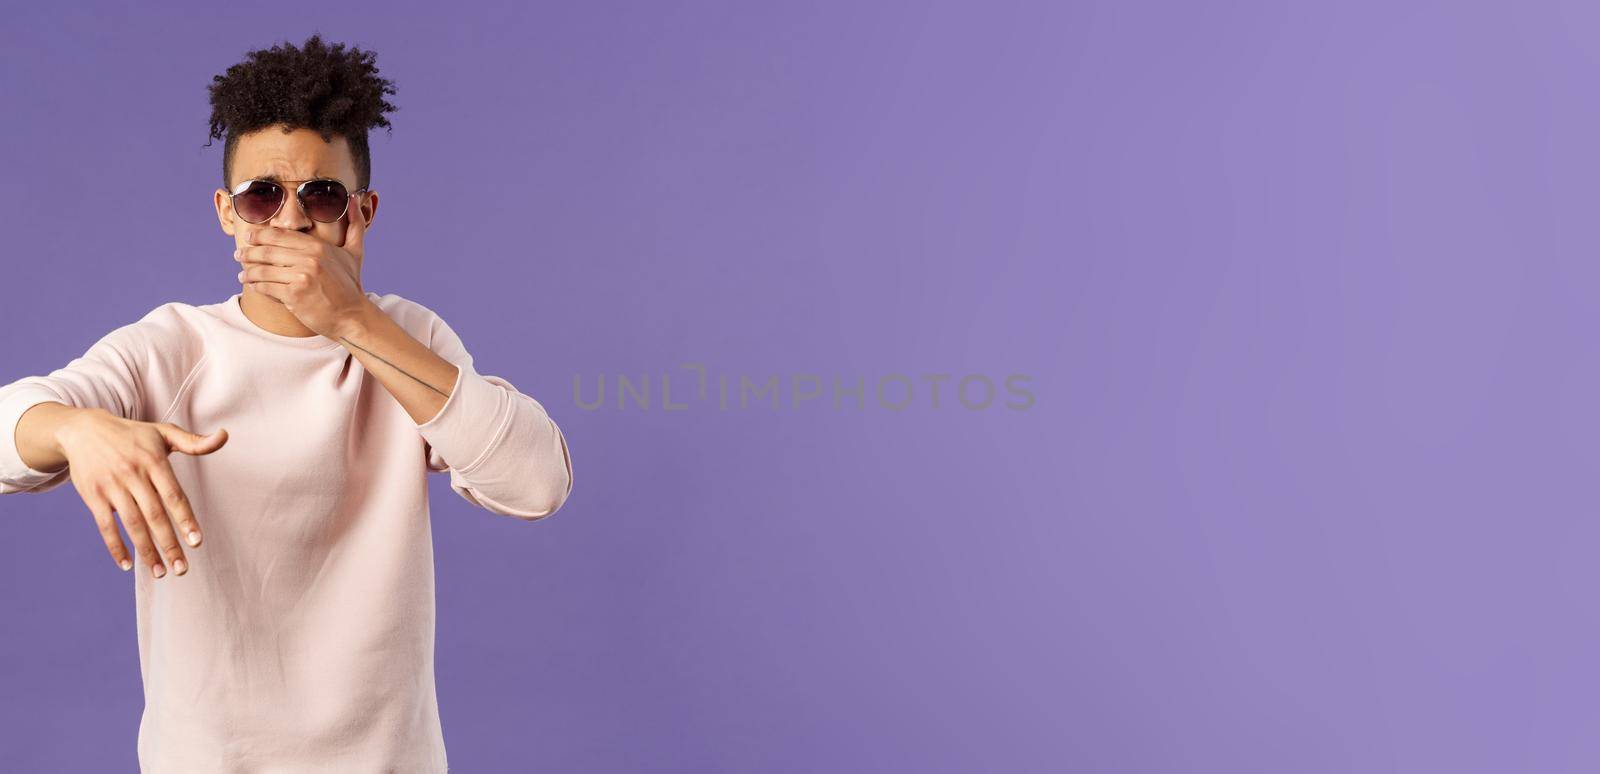 Waist-up portrait of cool and sassy, young carefree guy with dreads and sunglasses, cover mouth to beatbox, waving hand in rhythm music, singing rap or attend hip-hop party, purple background by Benzoix